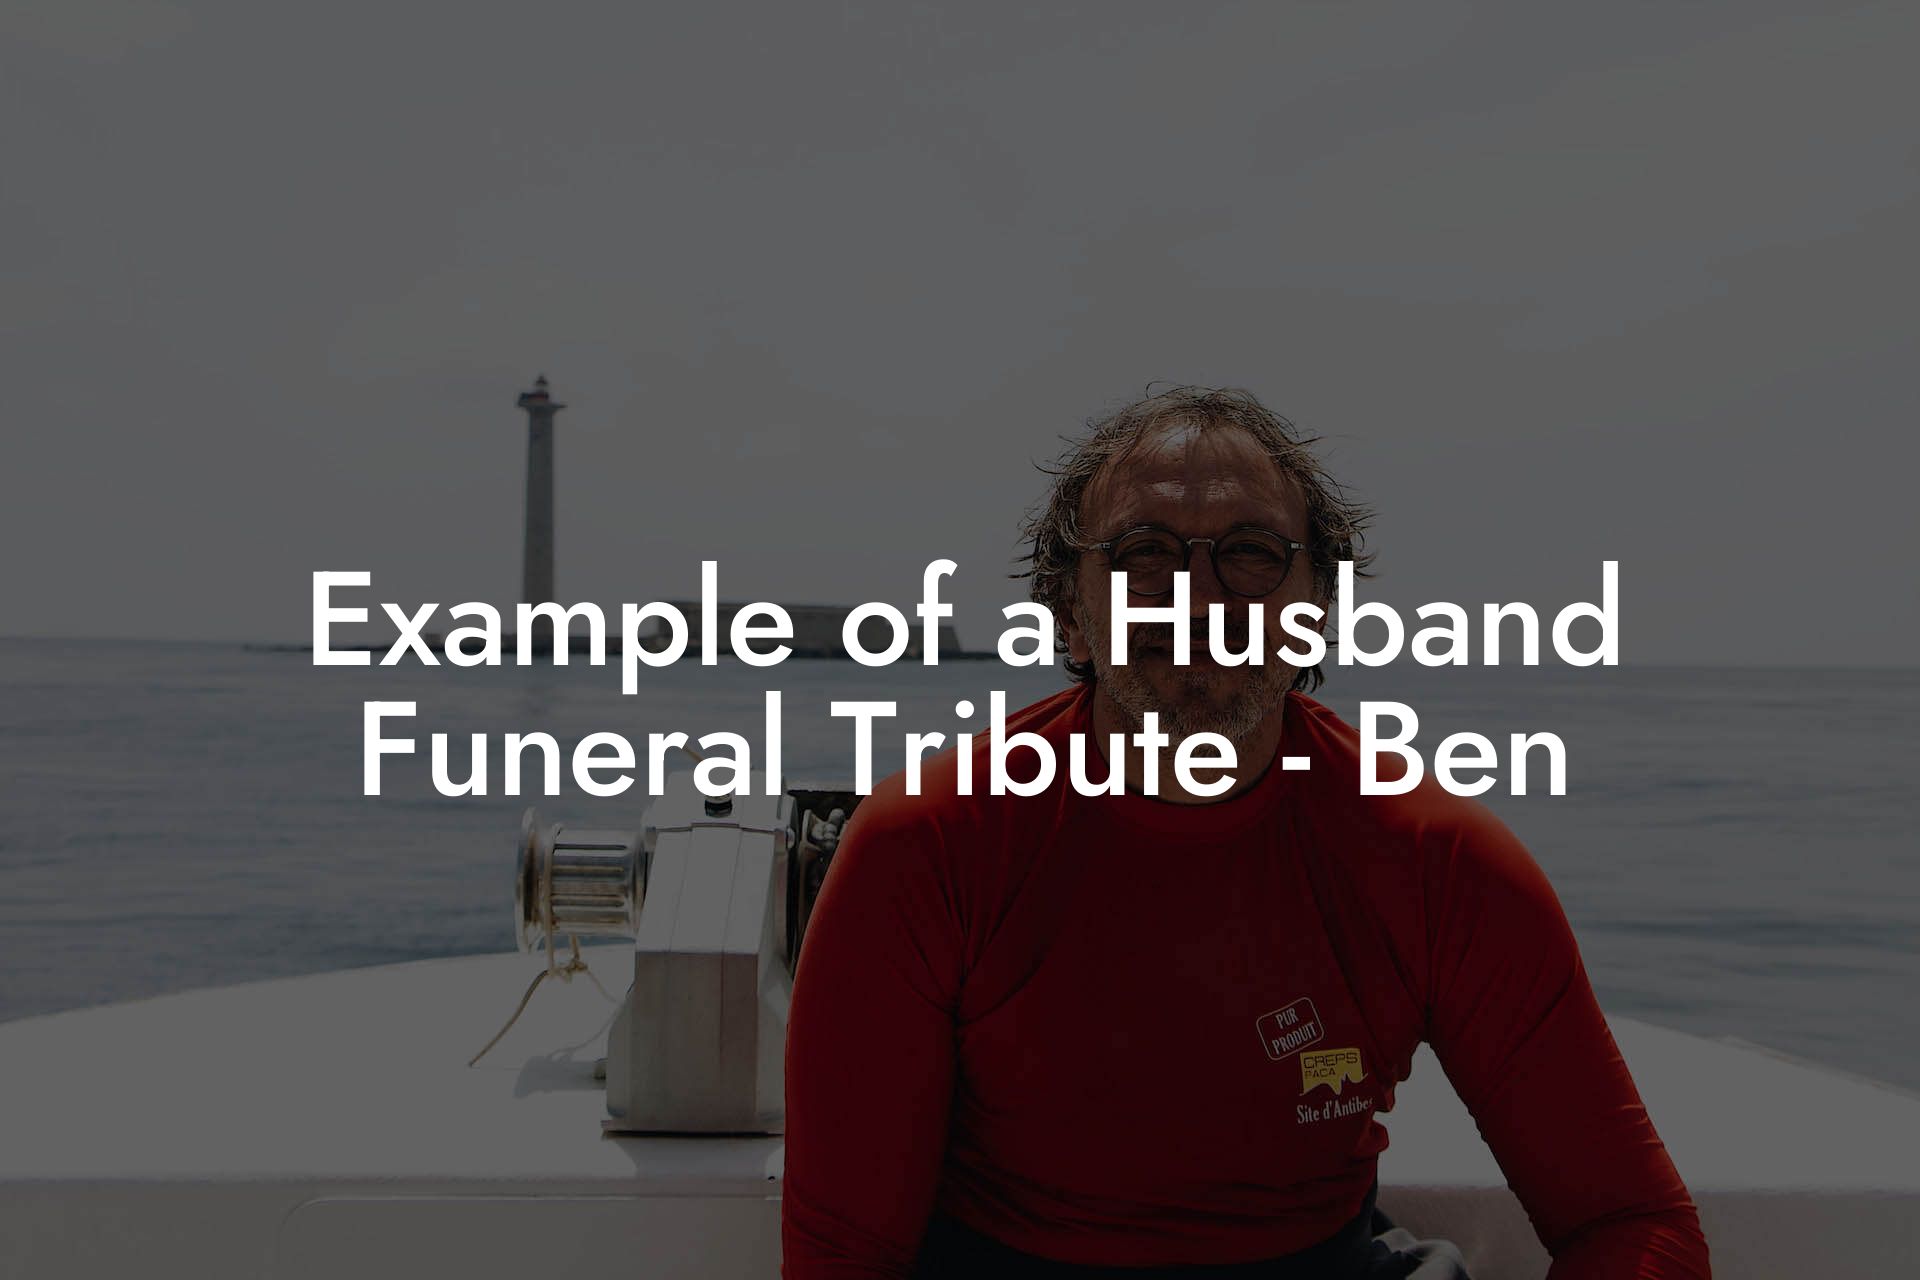 Example of a Husband Funeral Tribute - Ben